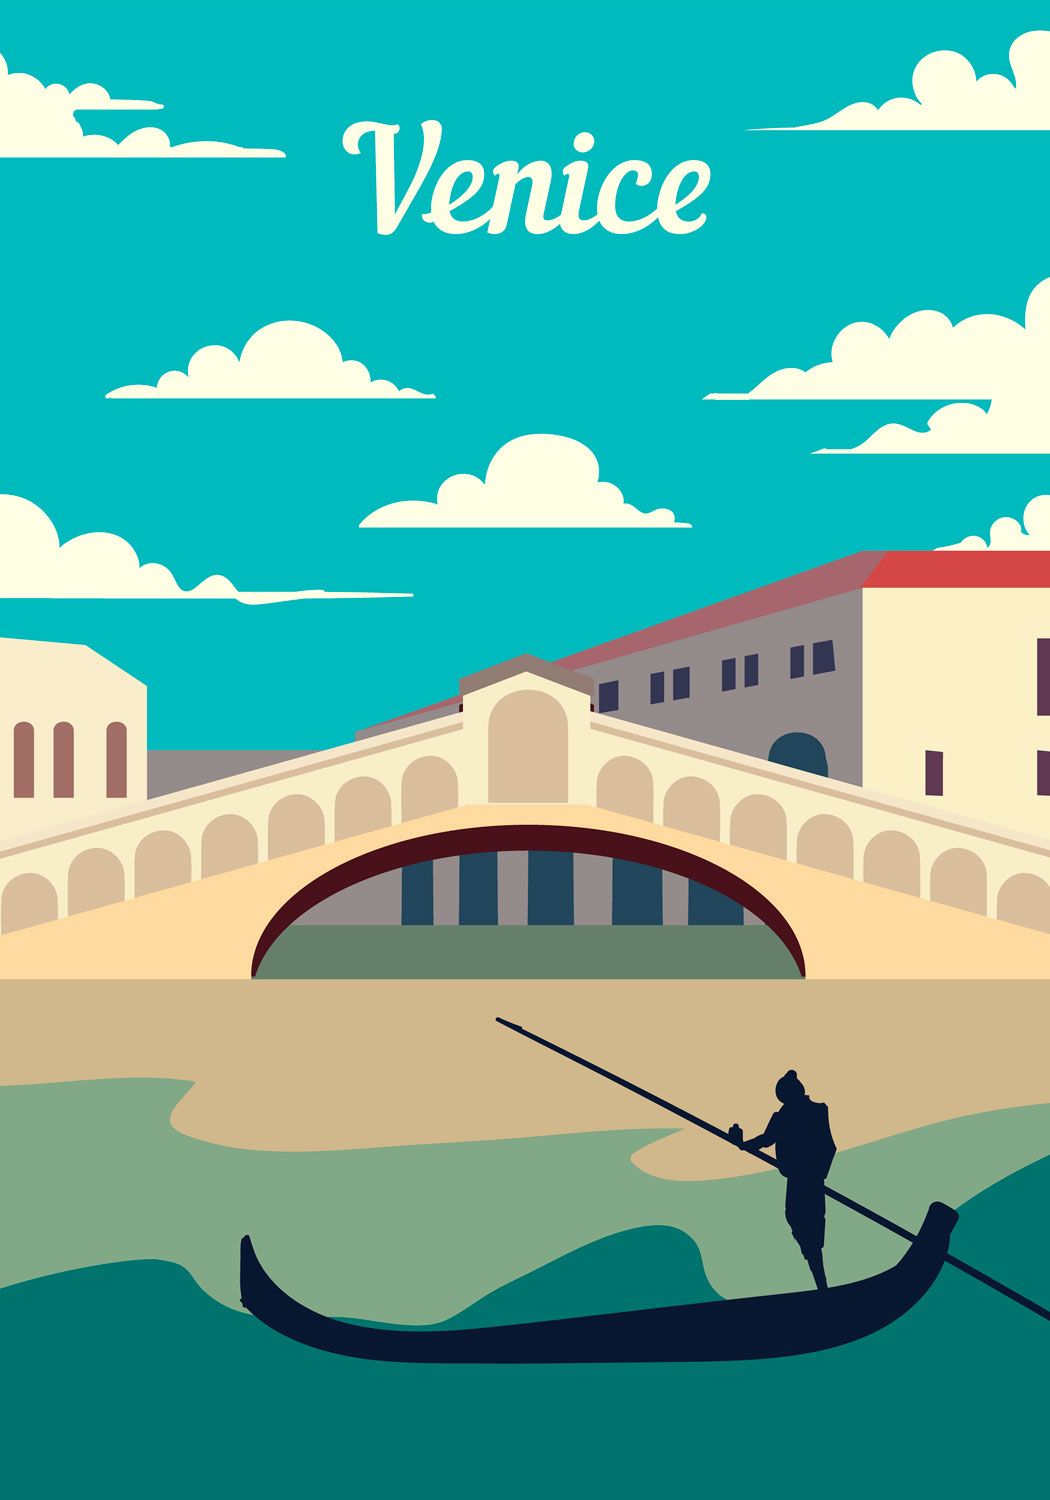 Venice Travel Poster. Free UK Delivery